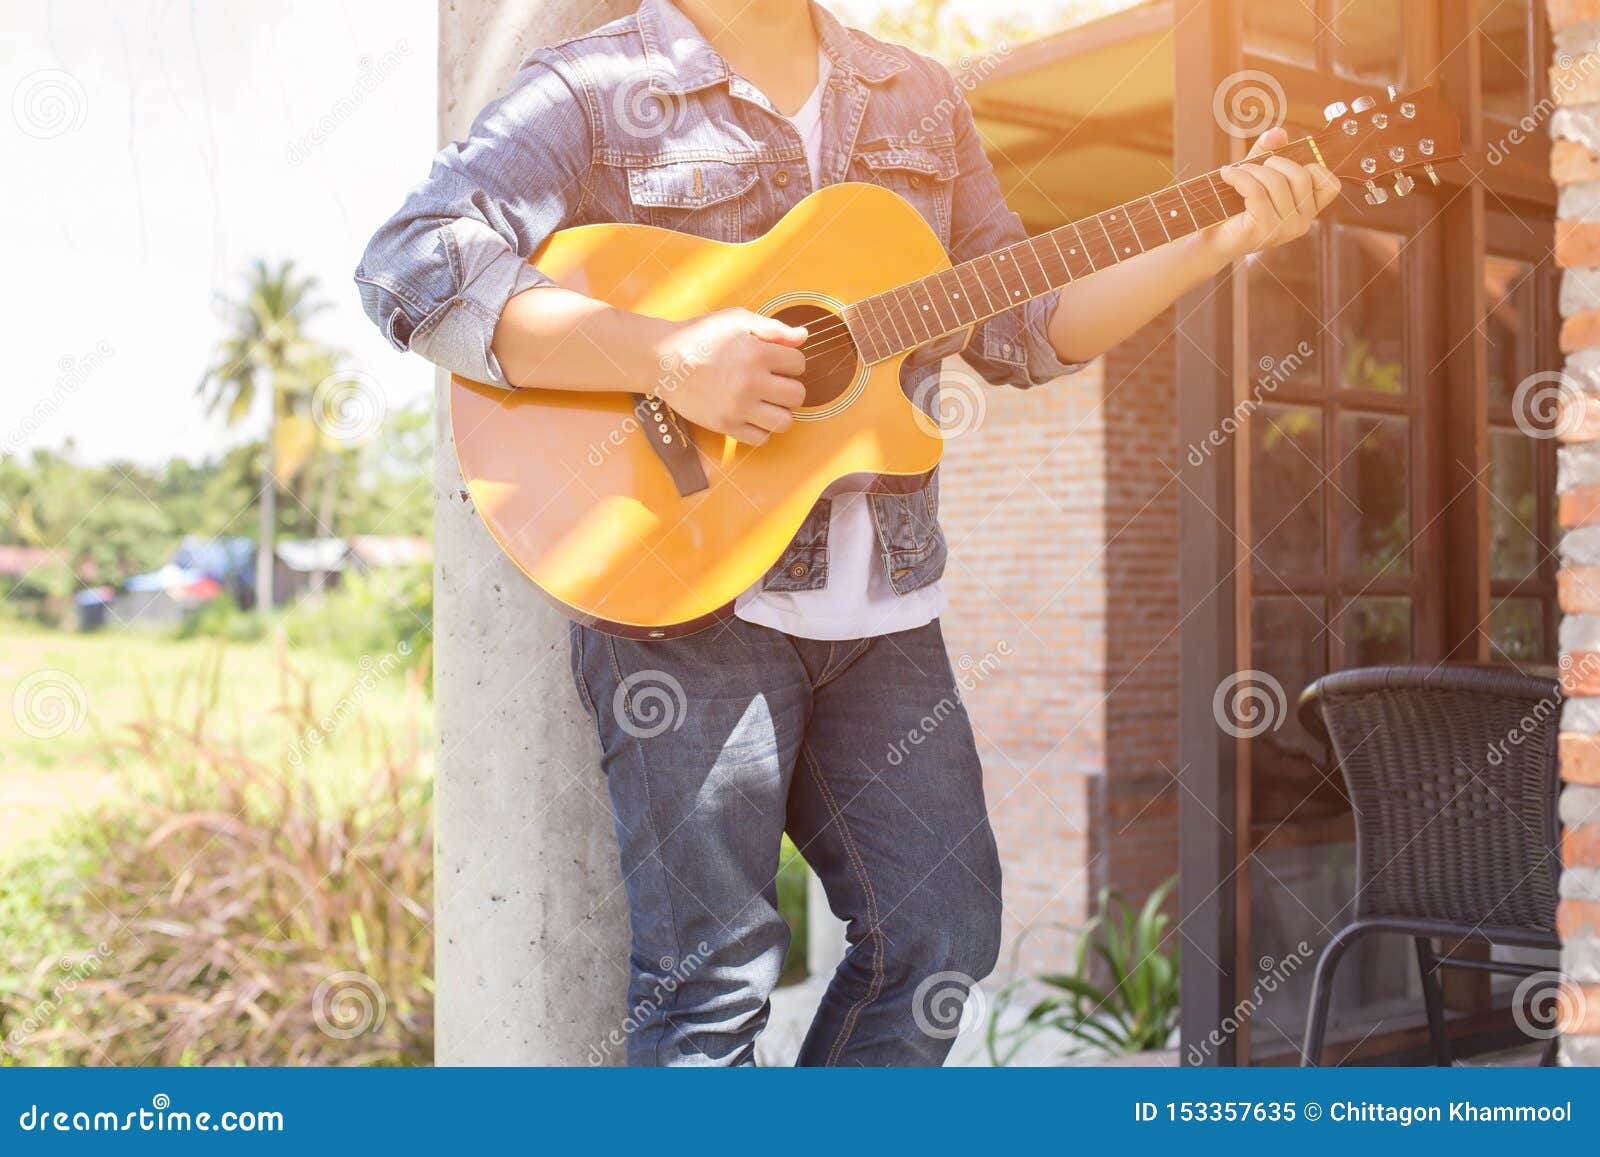 young hipster man practiced guitar in the park,happy and enjoy playing guitar.